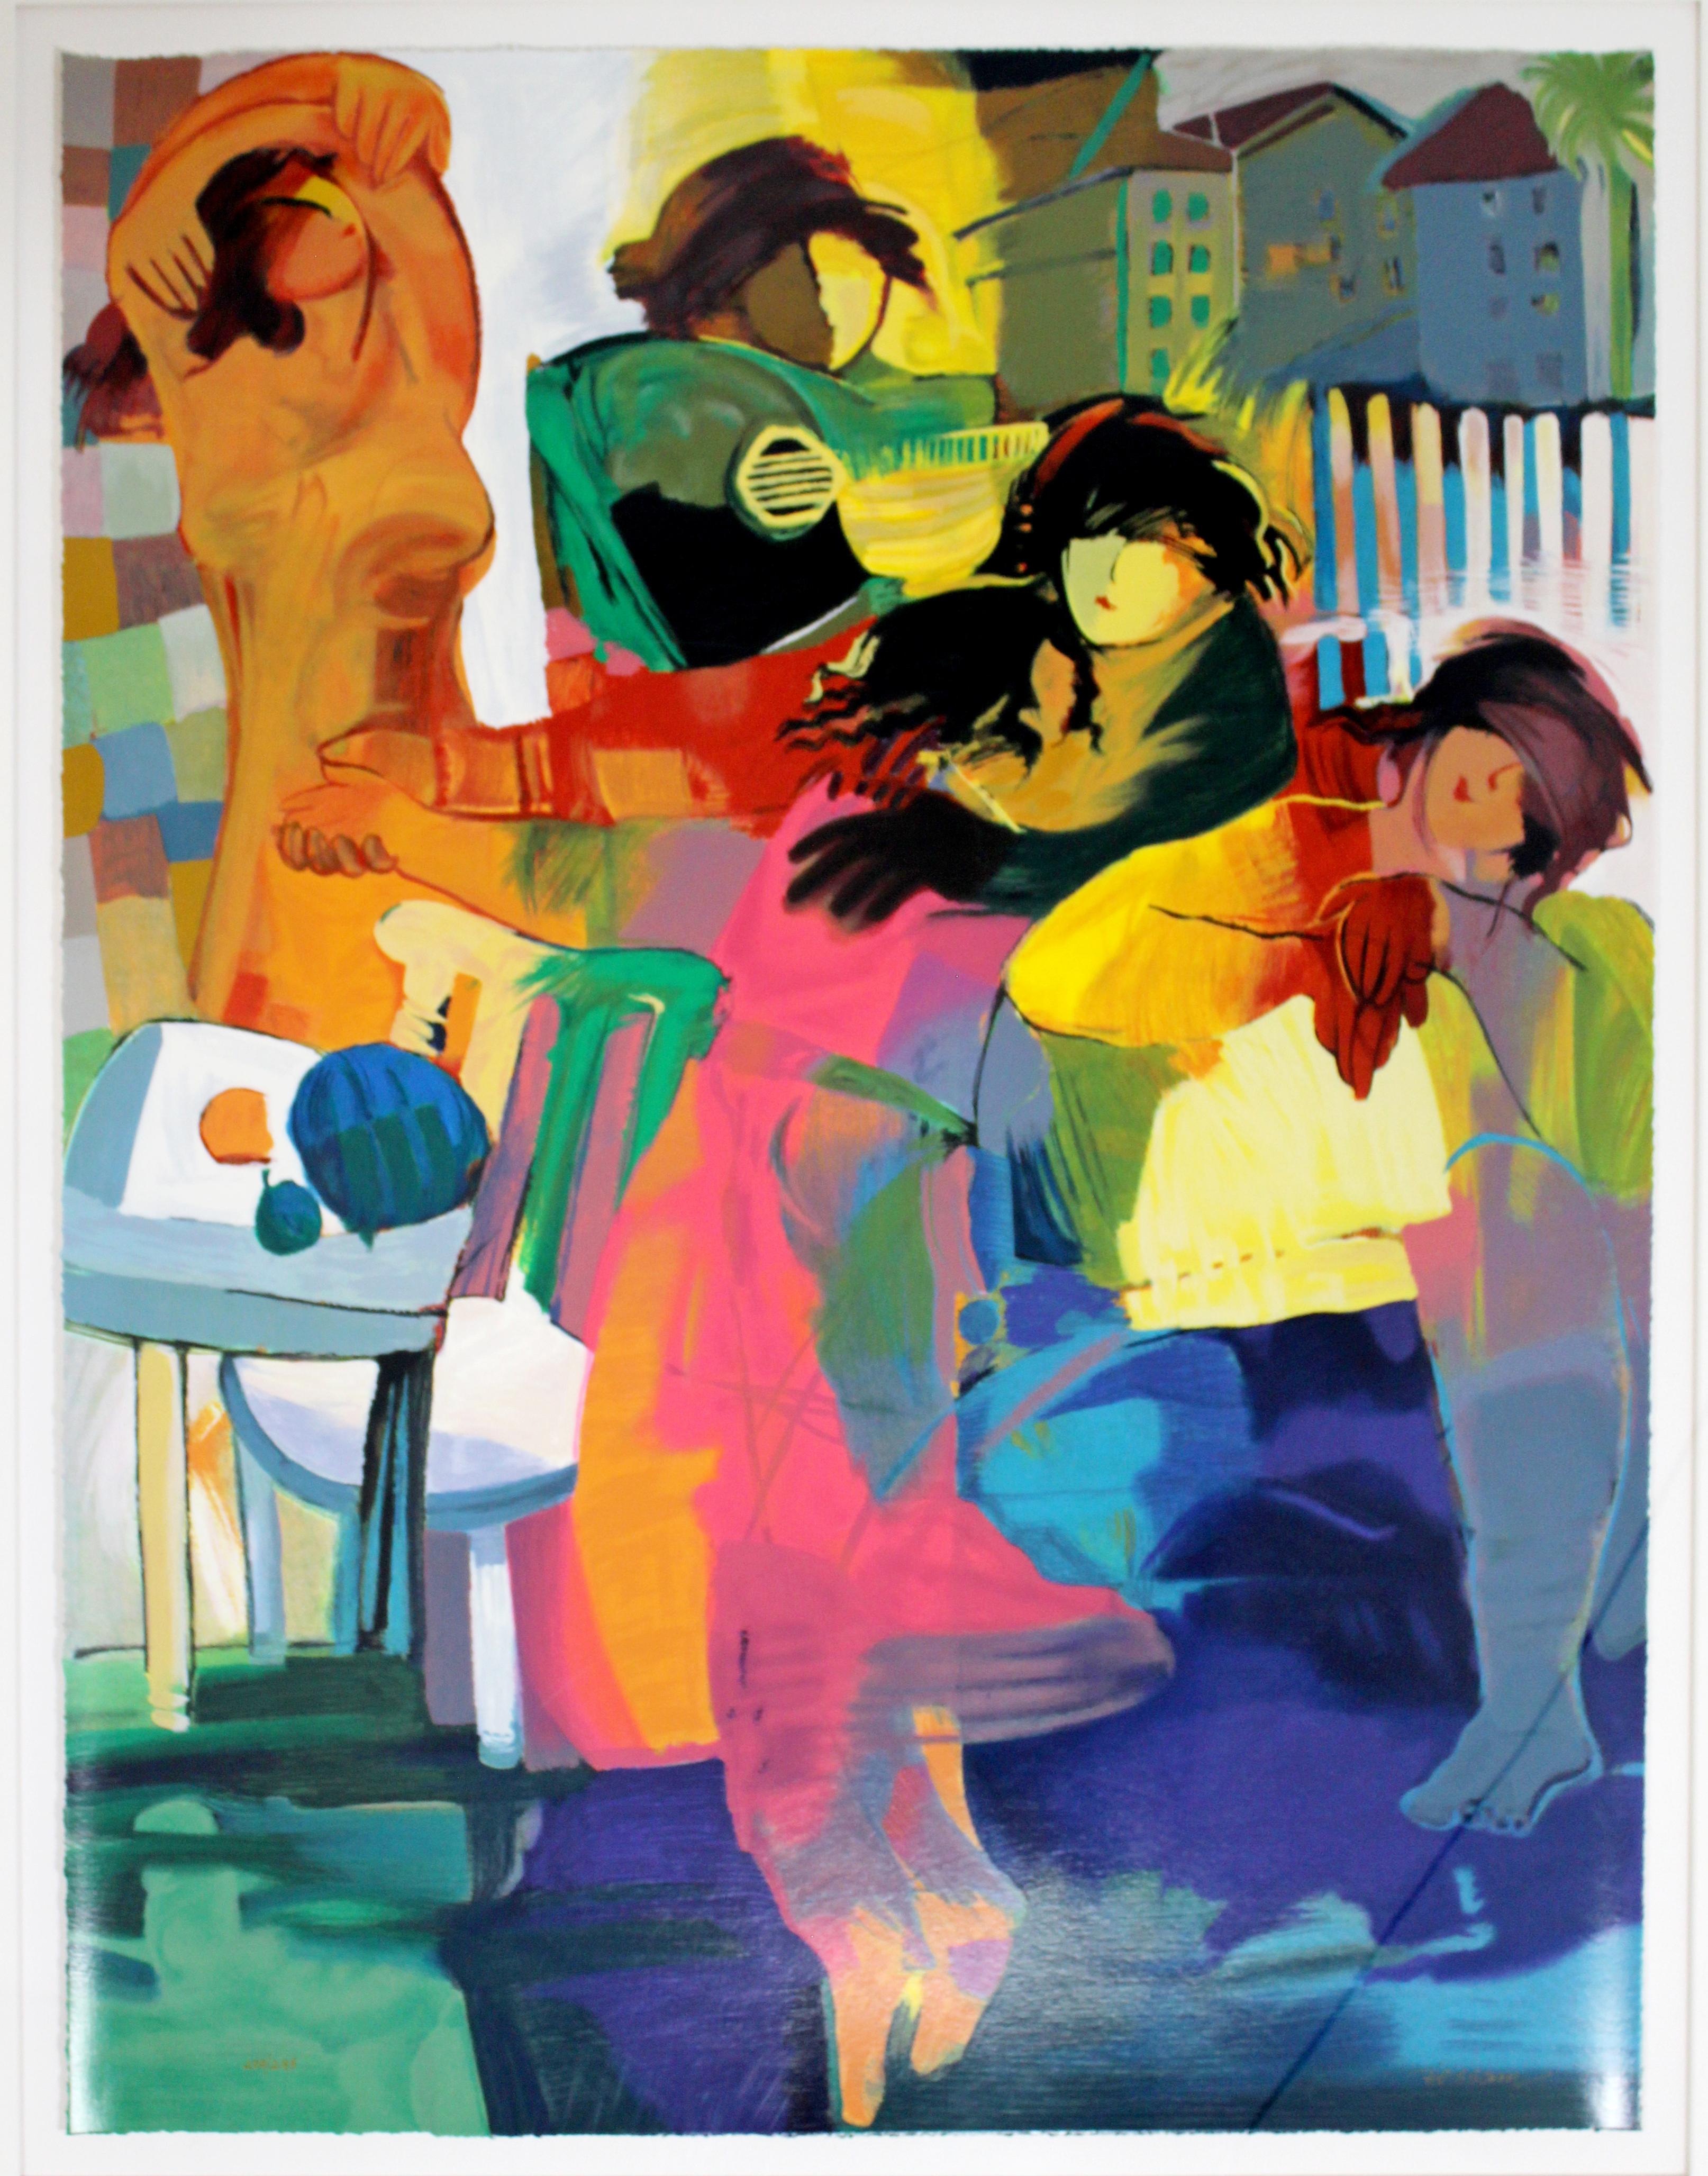 For your consideration is a vibrant, framed lithograph, depicting colorful women, signed Hessam Abrishami, numbered 200/295. In excellent condition. The dimensions of the frame are 48